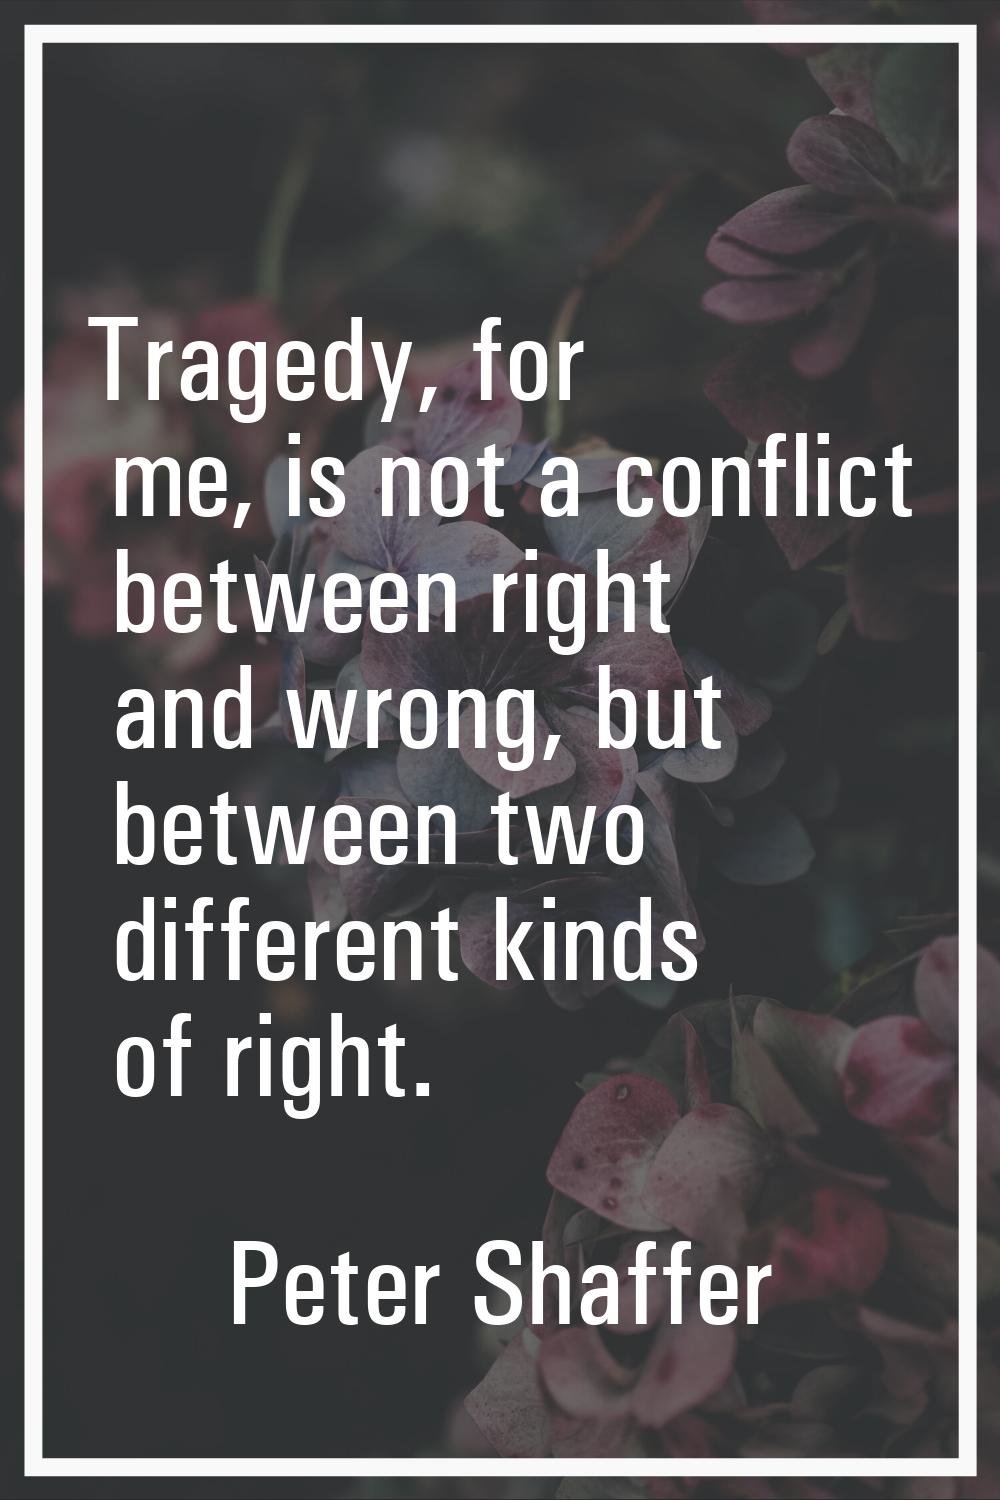 Tragedy, for me, is not a conflict between right and wrong, but between two different kinds of righ